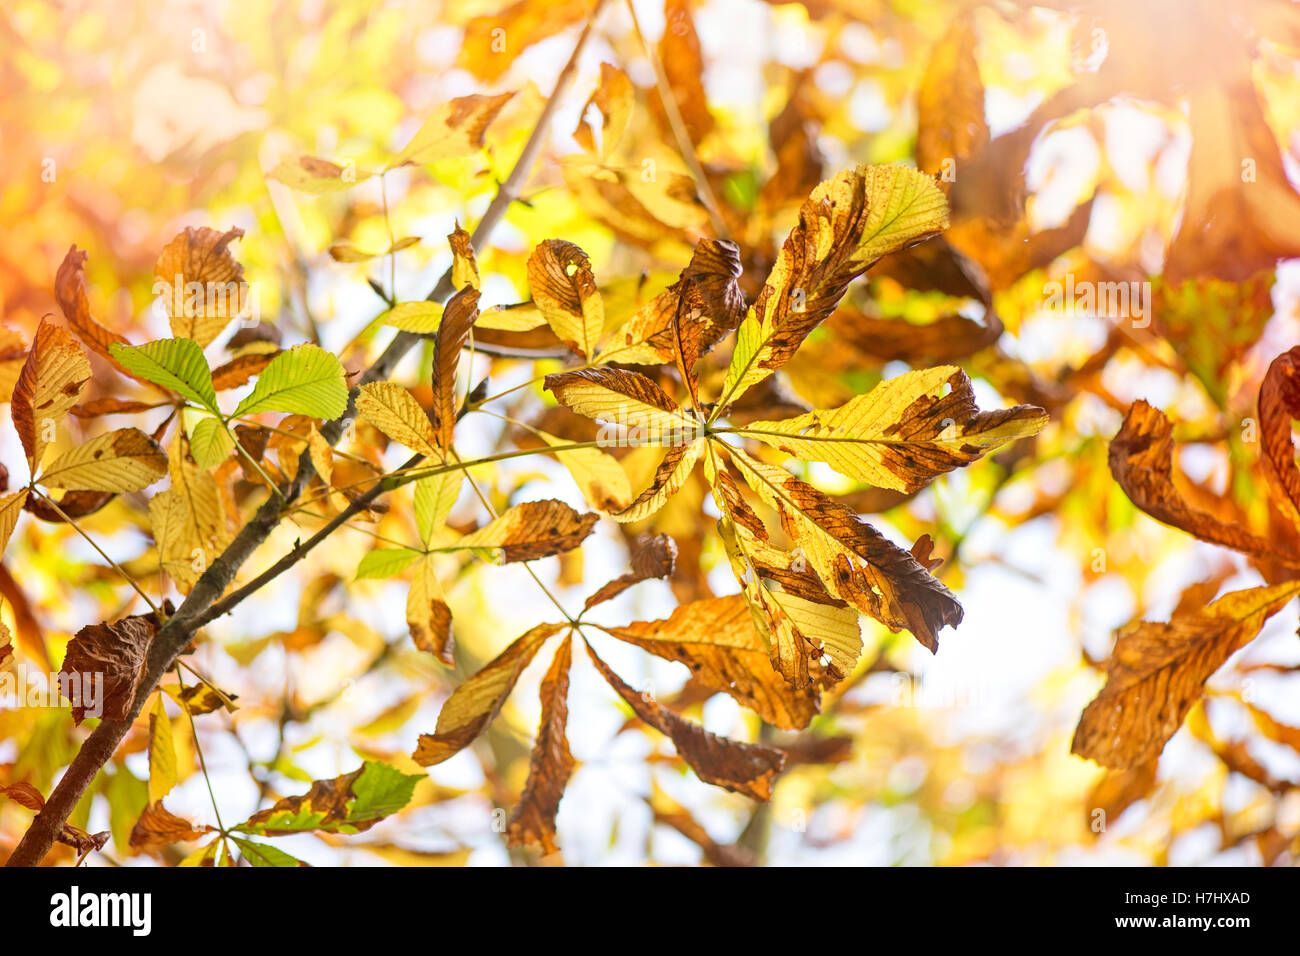 Autumn Colored chestnut Leaves Stock Photo